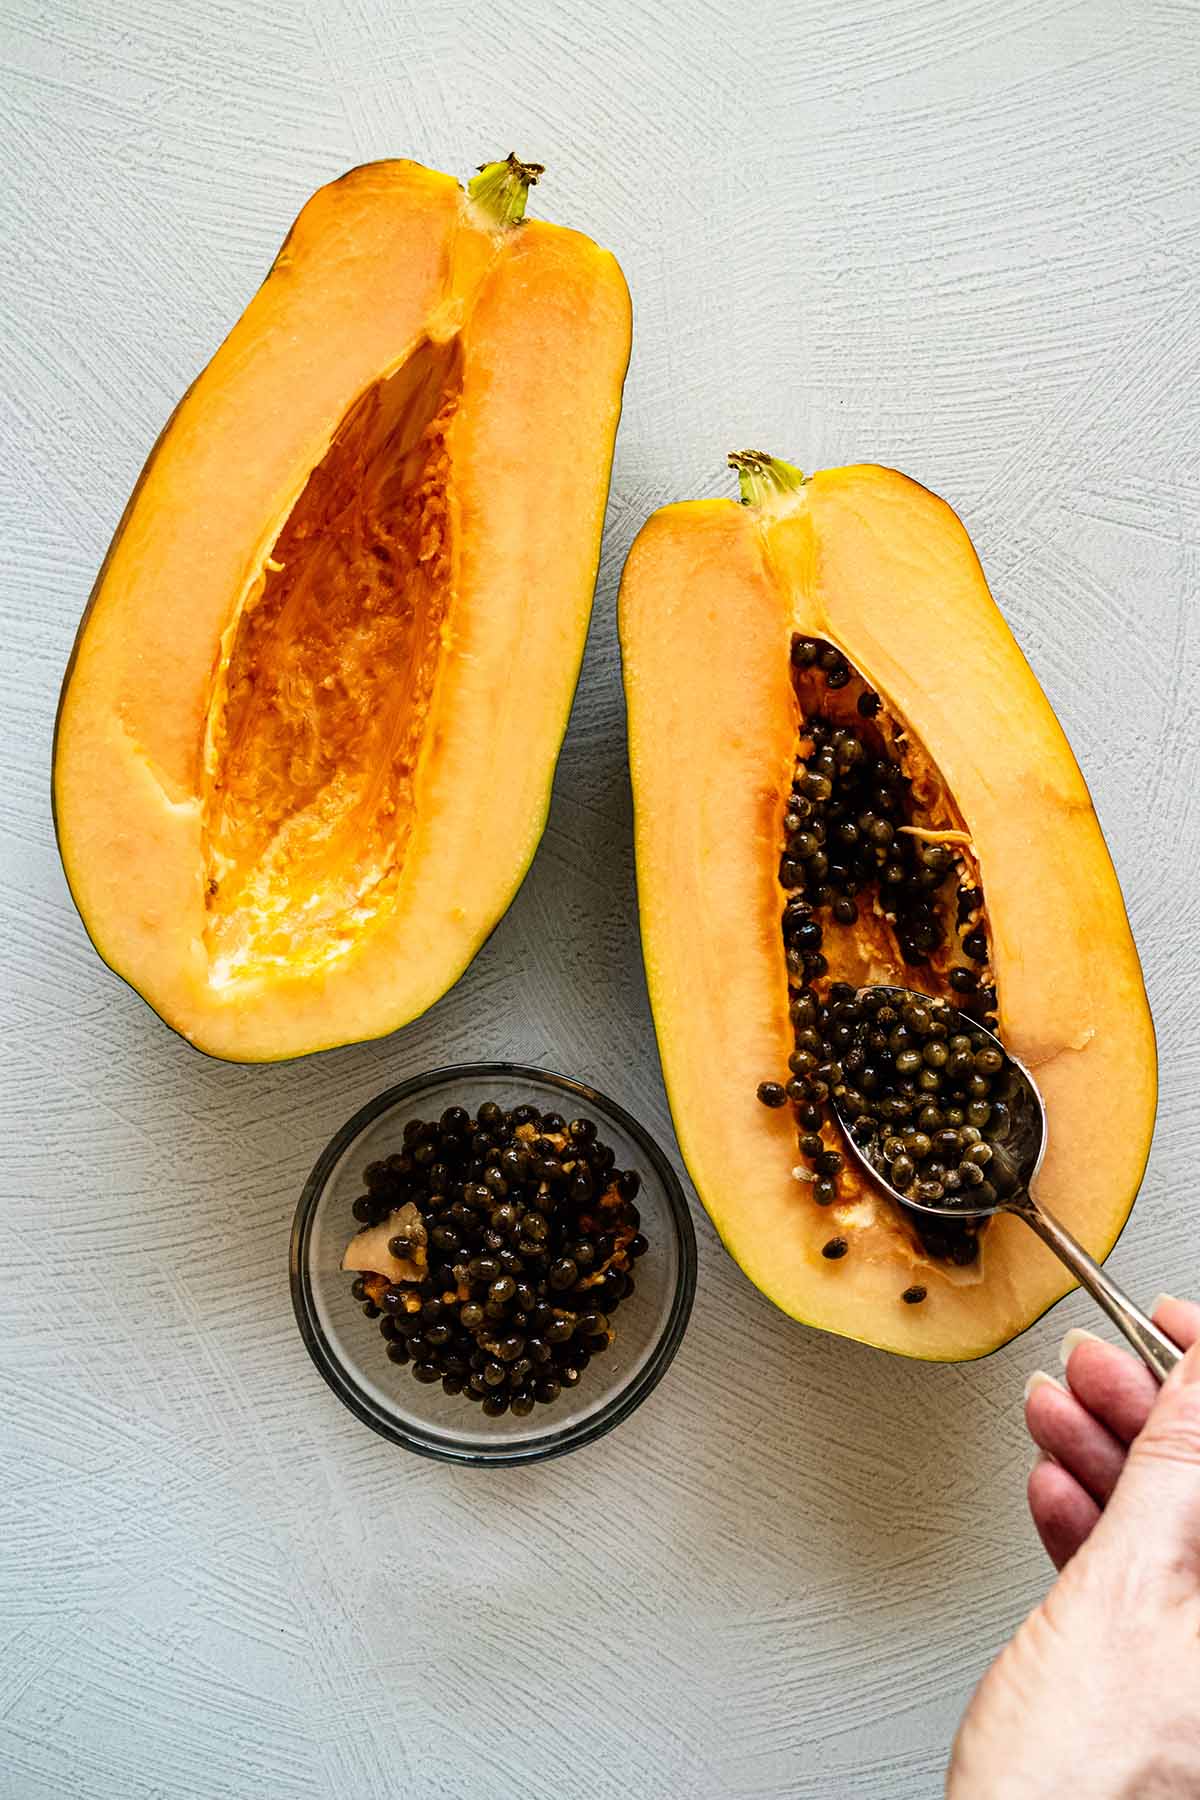 Overhead view of halved papaya on a countertop. A spoon is scooping out the seeds into a small glass bowl.